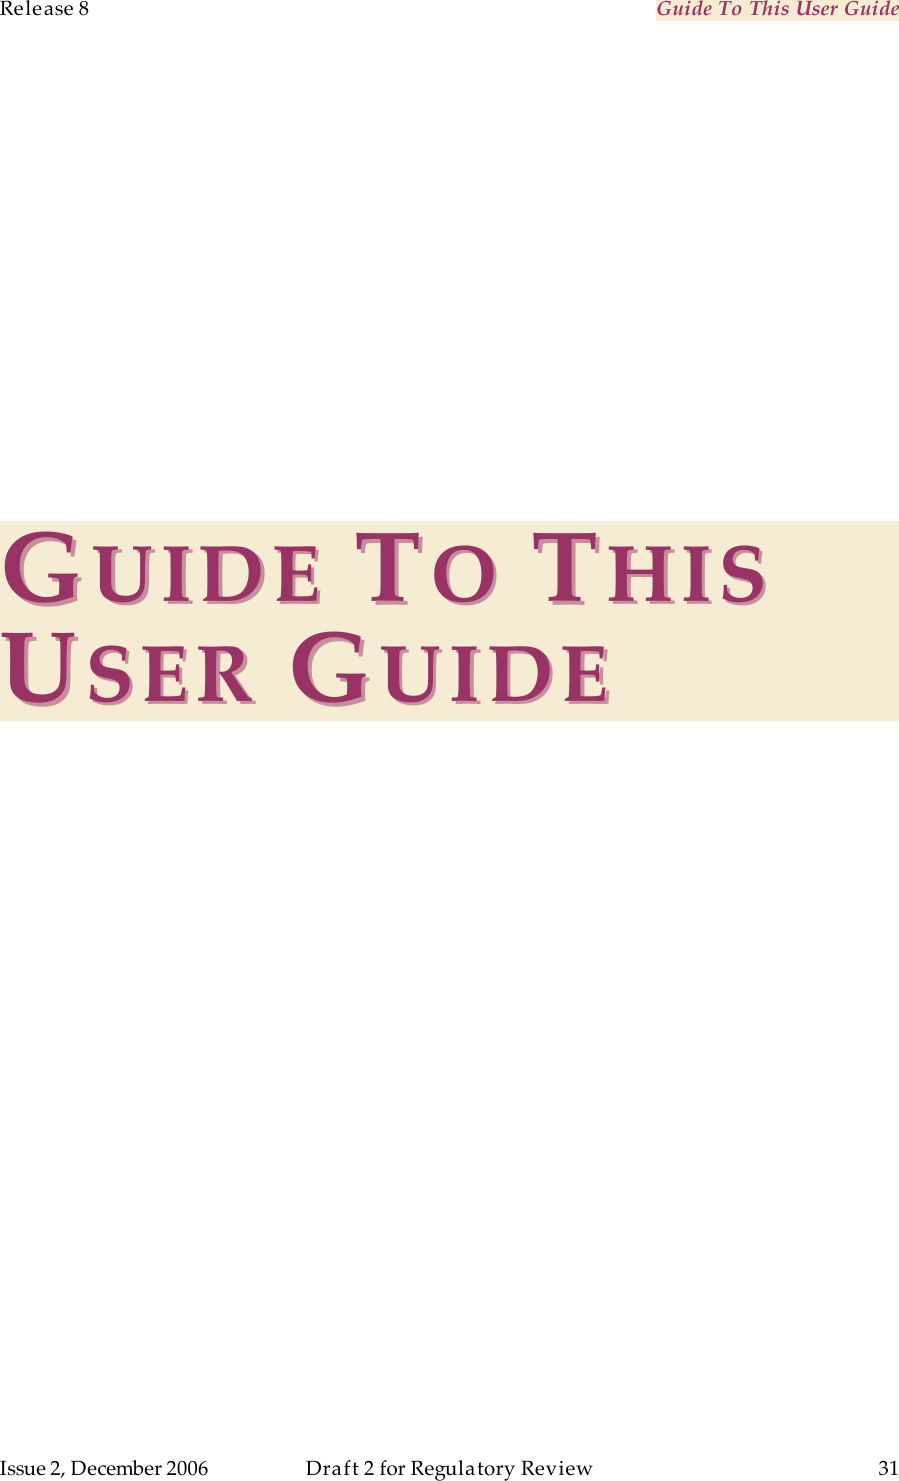 Release 8    Guide To This User Guide                  March 200                  Through Software Release 6.   Issue 2, December 2006  Draft 2 for Regulatory Review  31     GGUIDEUIDE   TTOO  TTHISHIS  UUSERSER   GGUIDEUIDE   